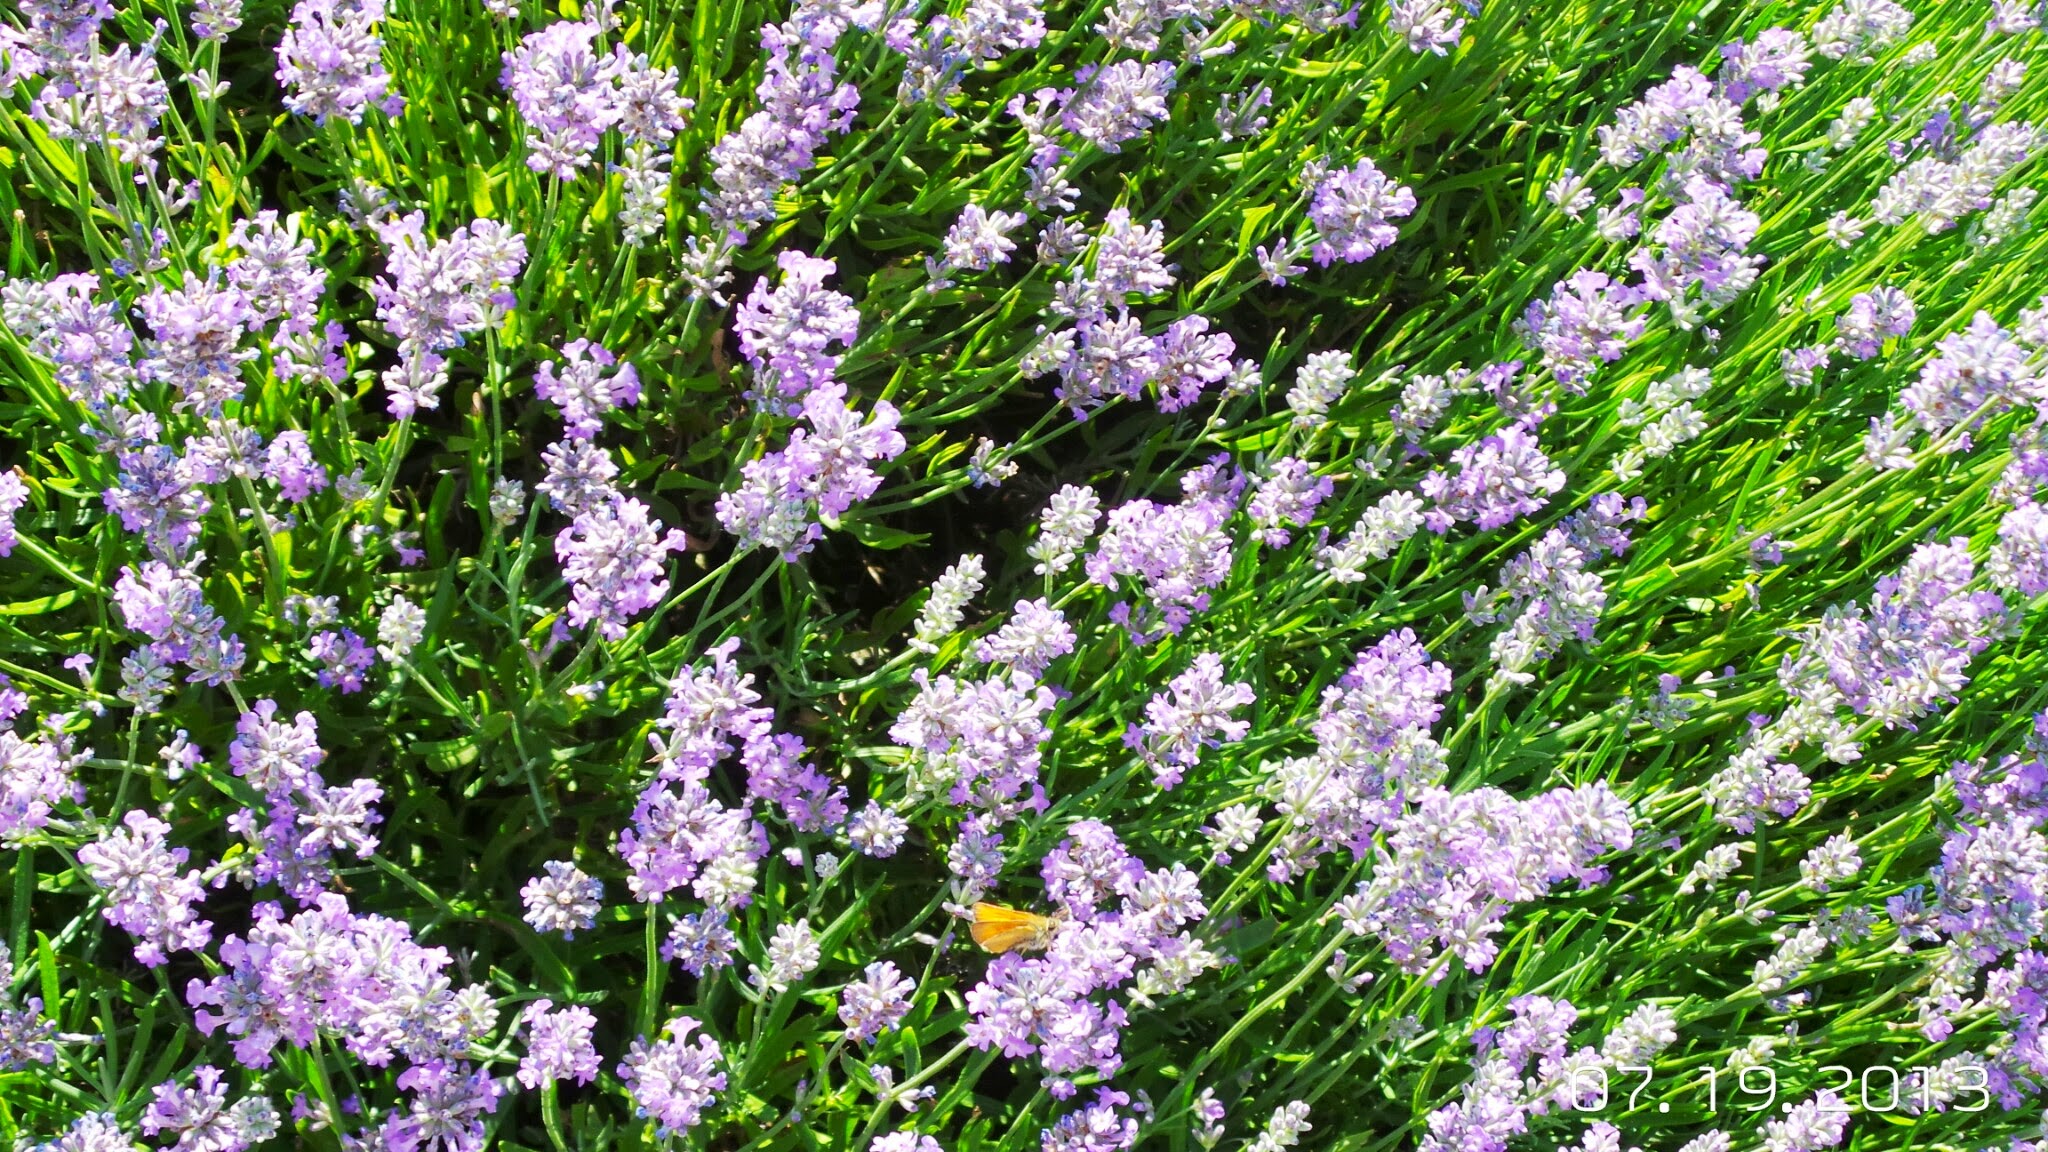 Lavender and Butterfly at Sudeley Castle